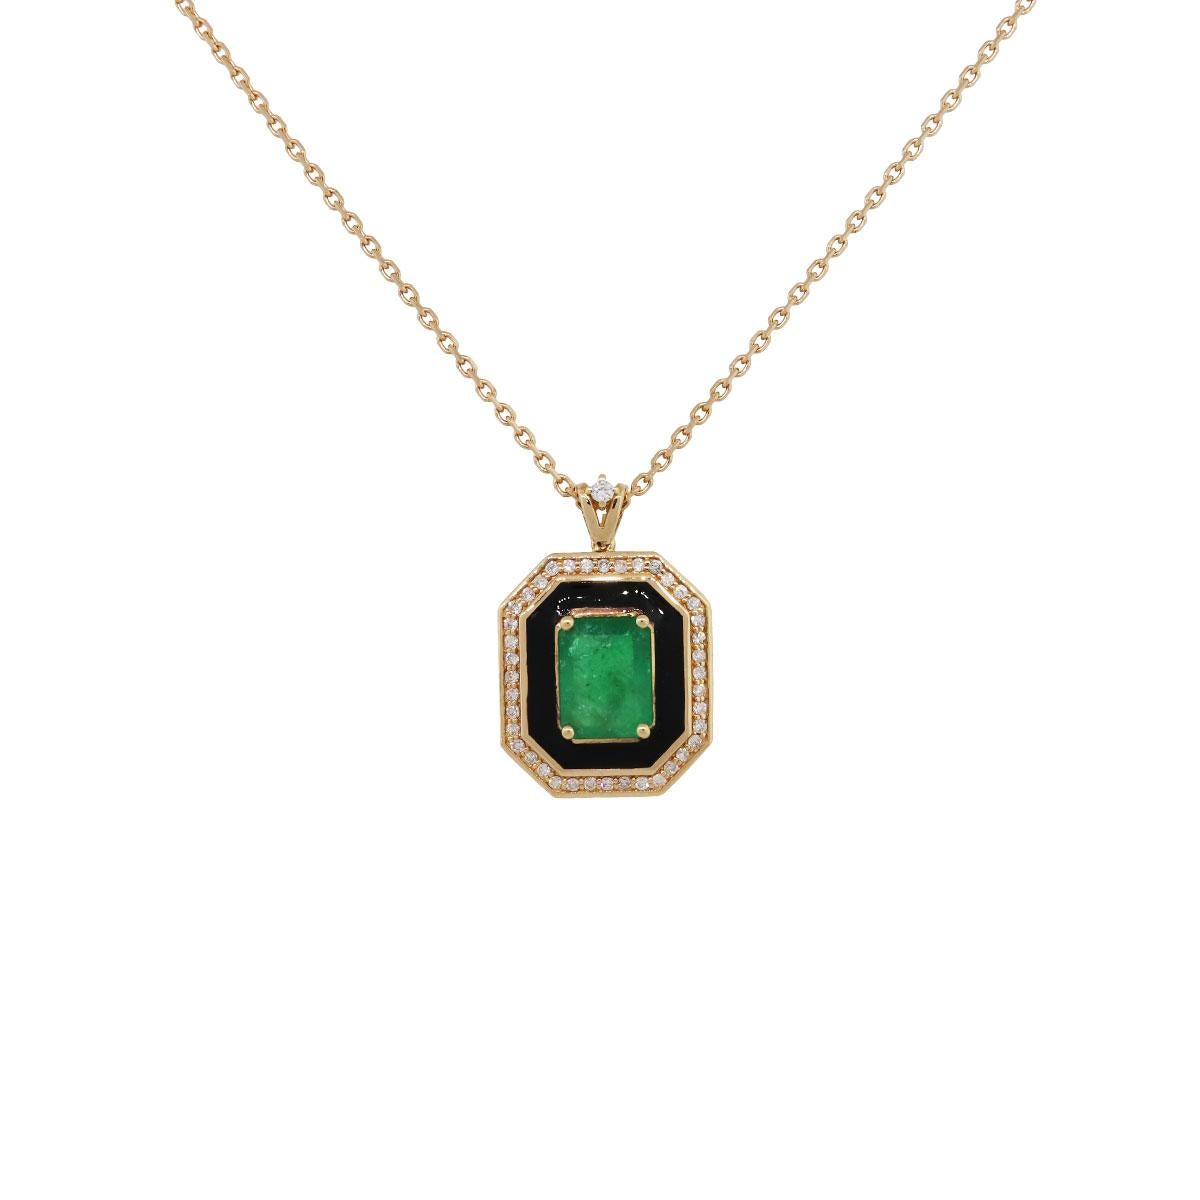 Material: 18k rose gold
Diamond Details: Approximately 0.28ctw of round brilliant diamonds. Diamonds are G/H in color and VS in clarity
Gemstone Details: Emerald approximately 1.95ct
Measurements: Necklace measures 17.50″ in length
Pendant